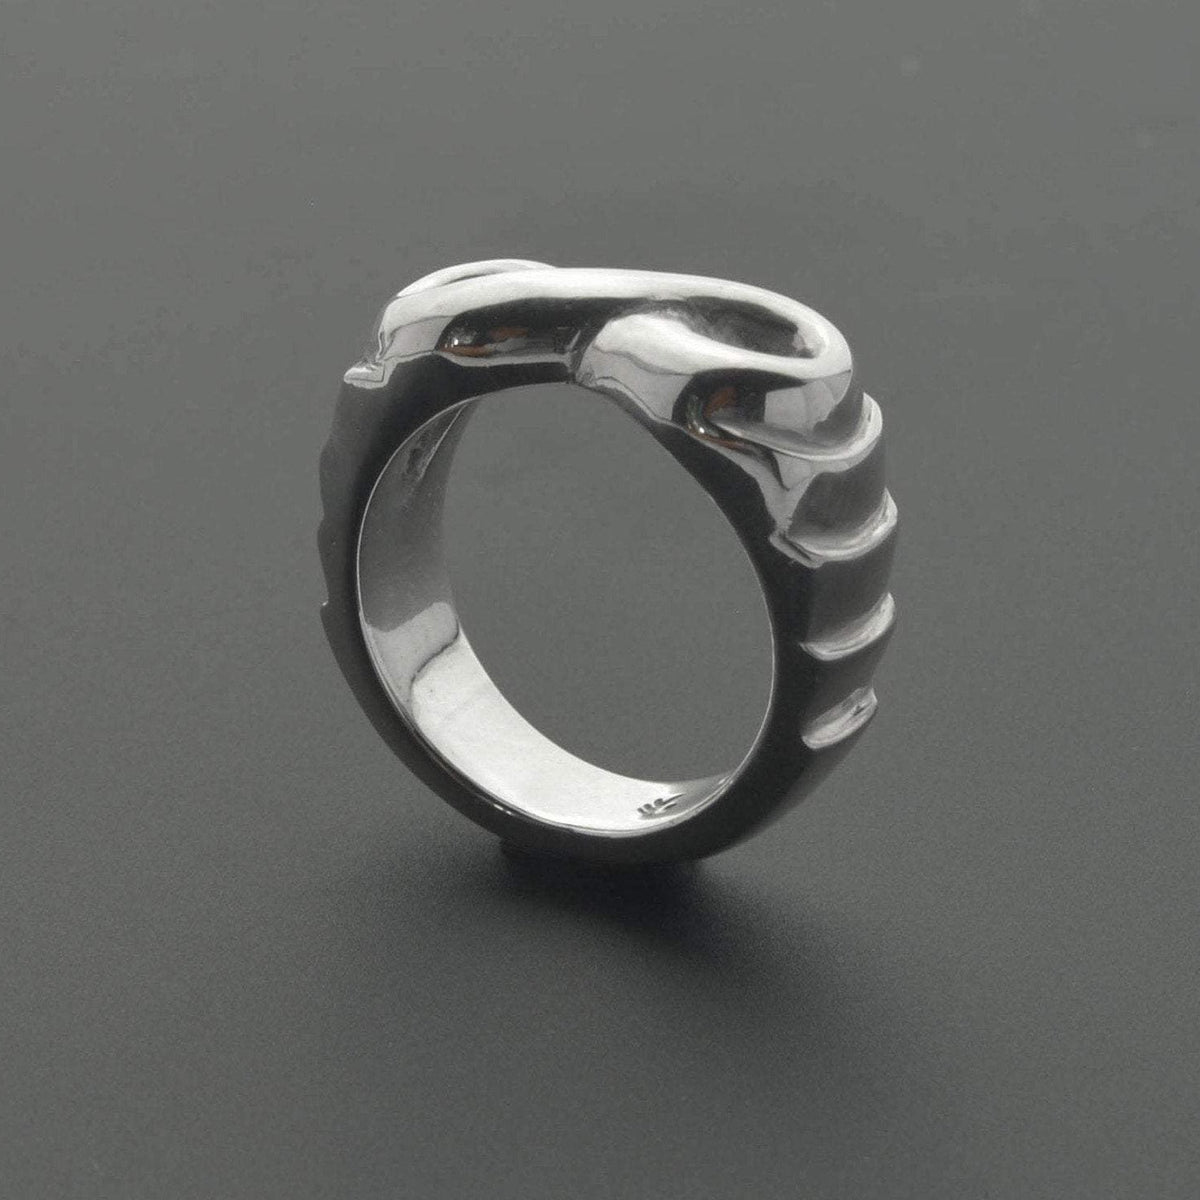 Infinity symbol sterling silver ring